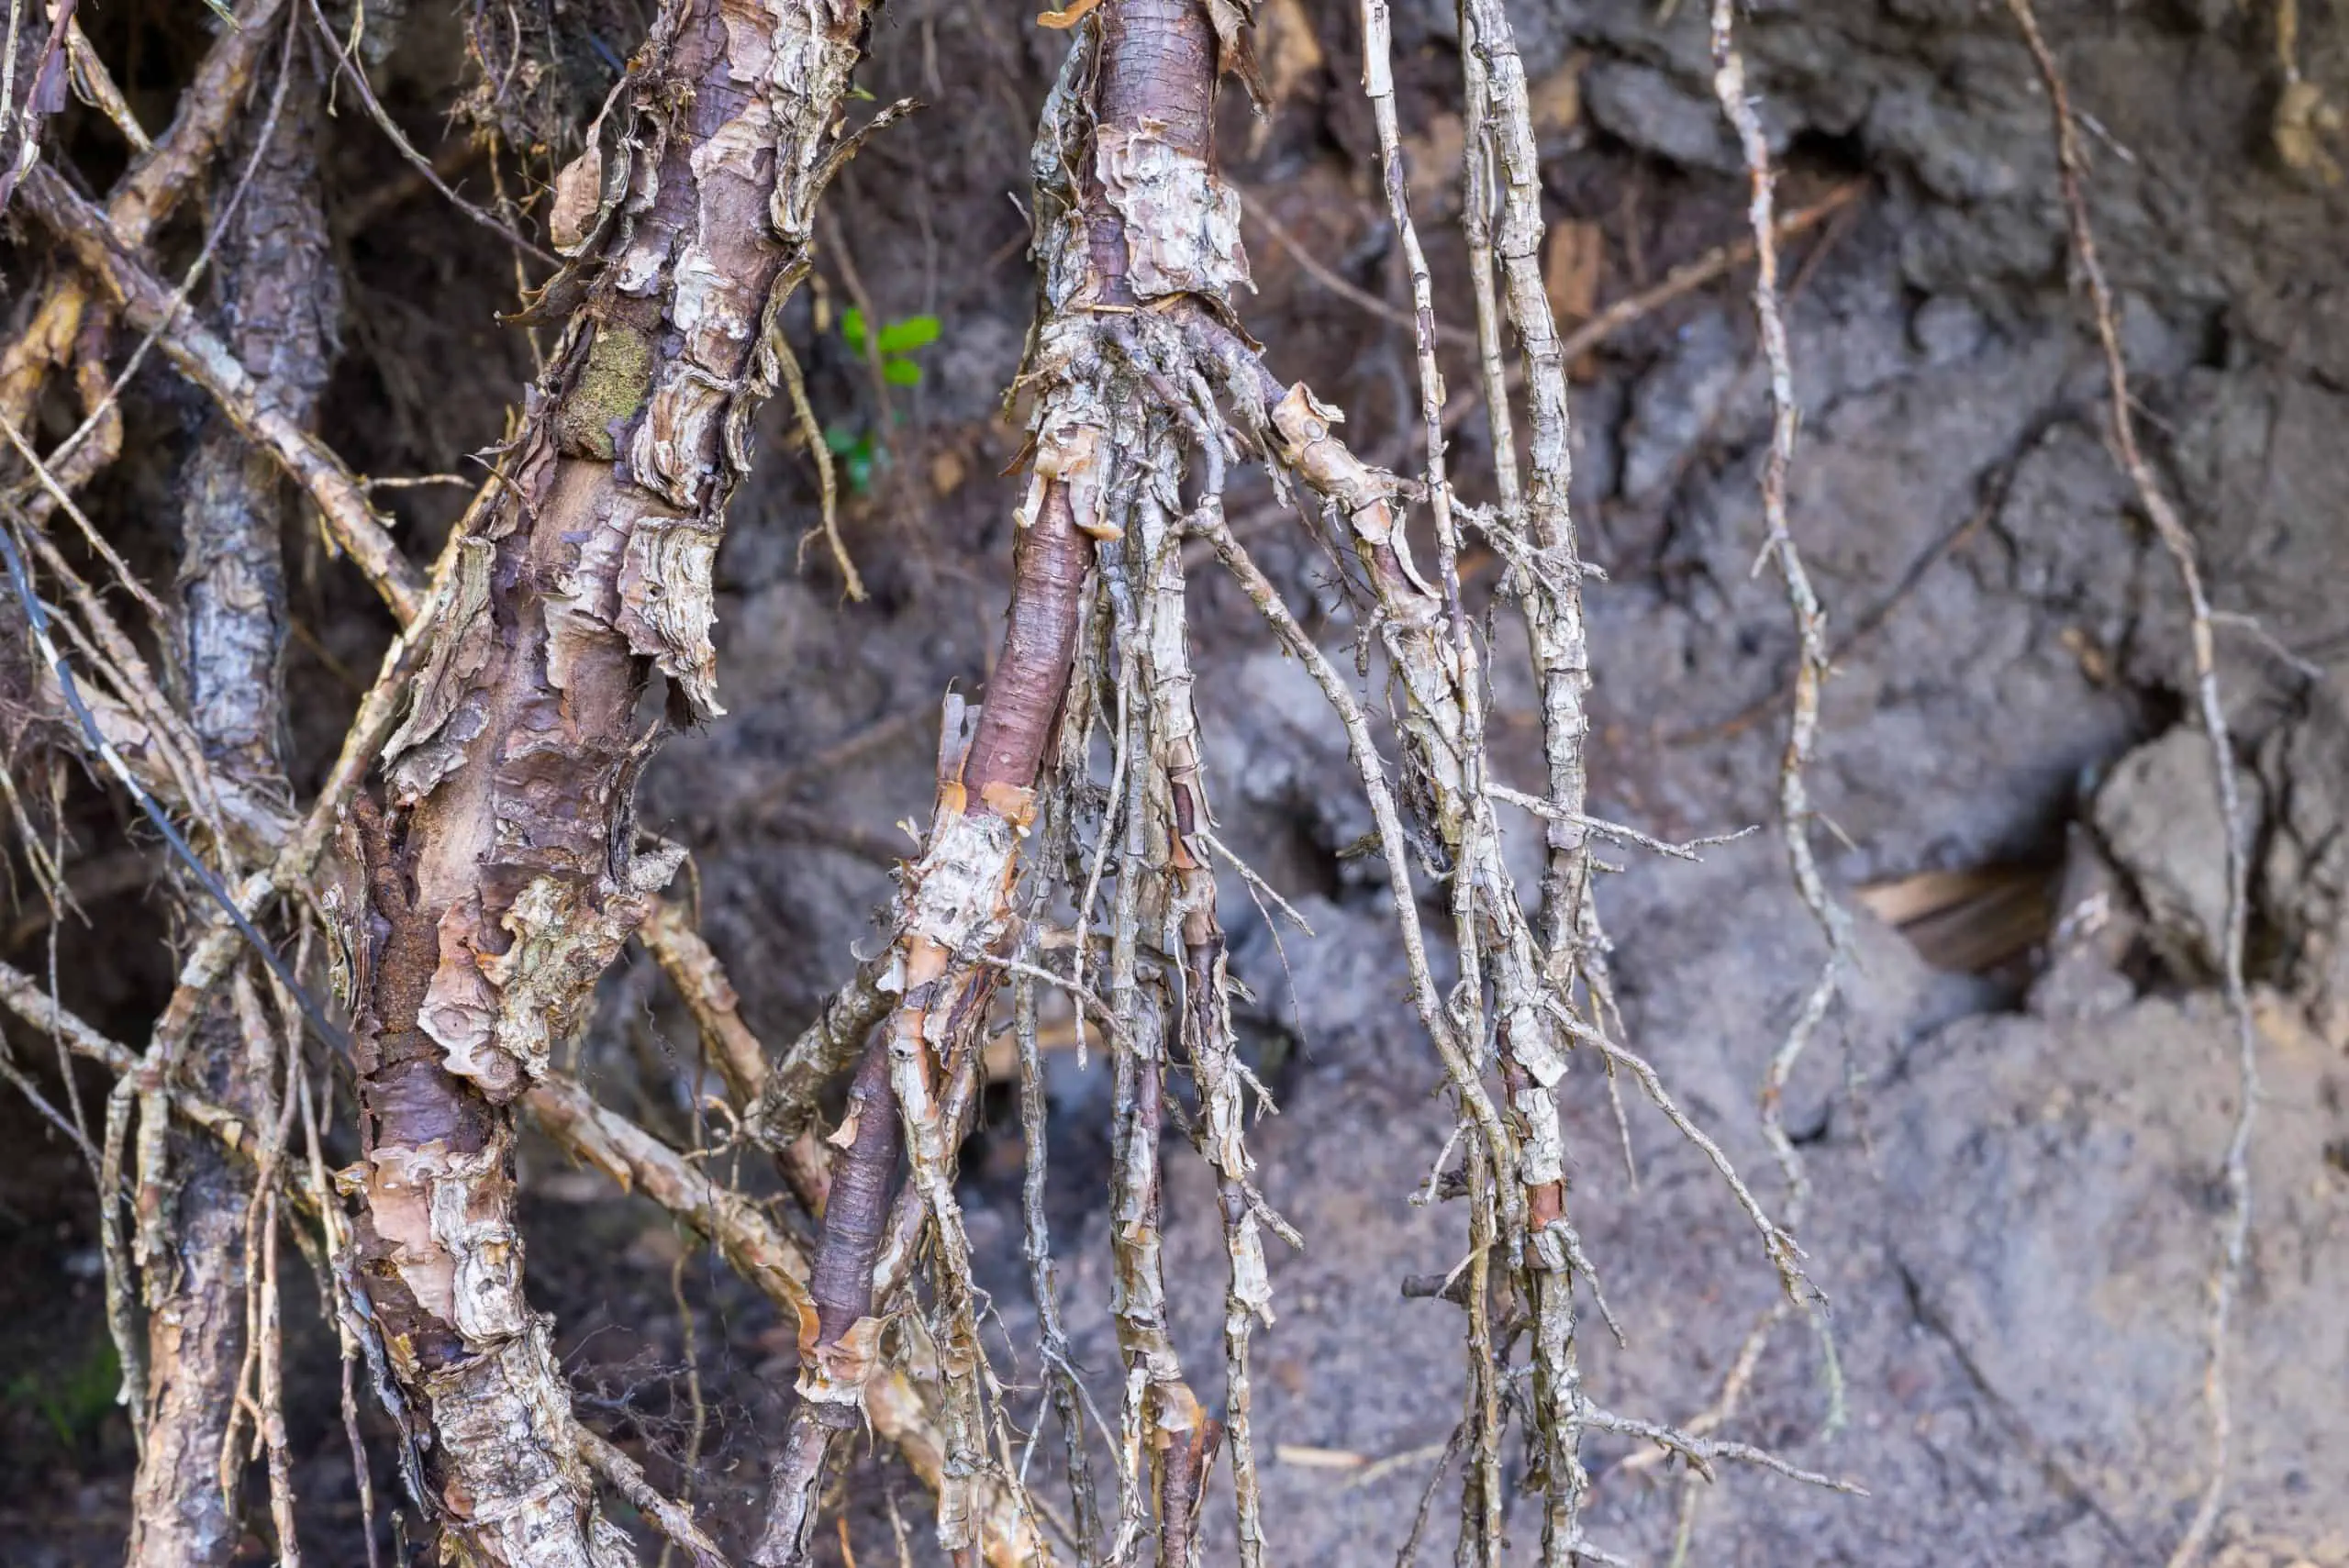 The destroyed and bound roots or rhizomes of trees closeup for an abstract and natural vegetable background